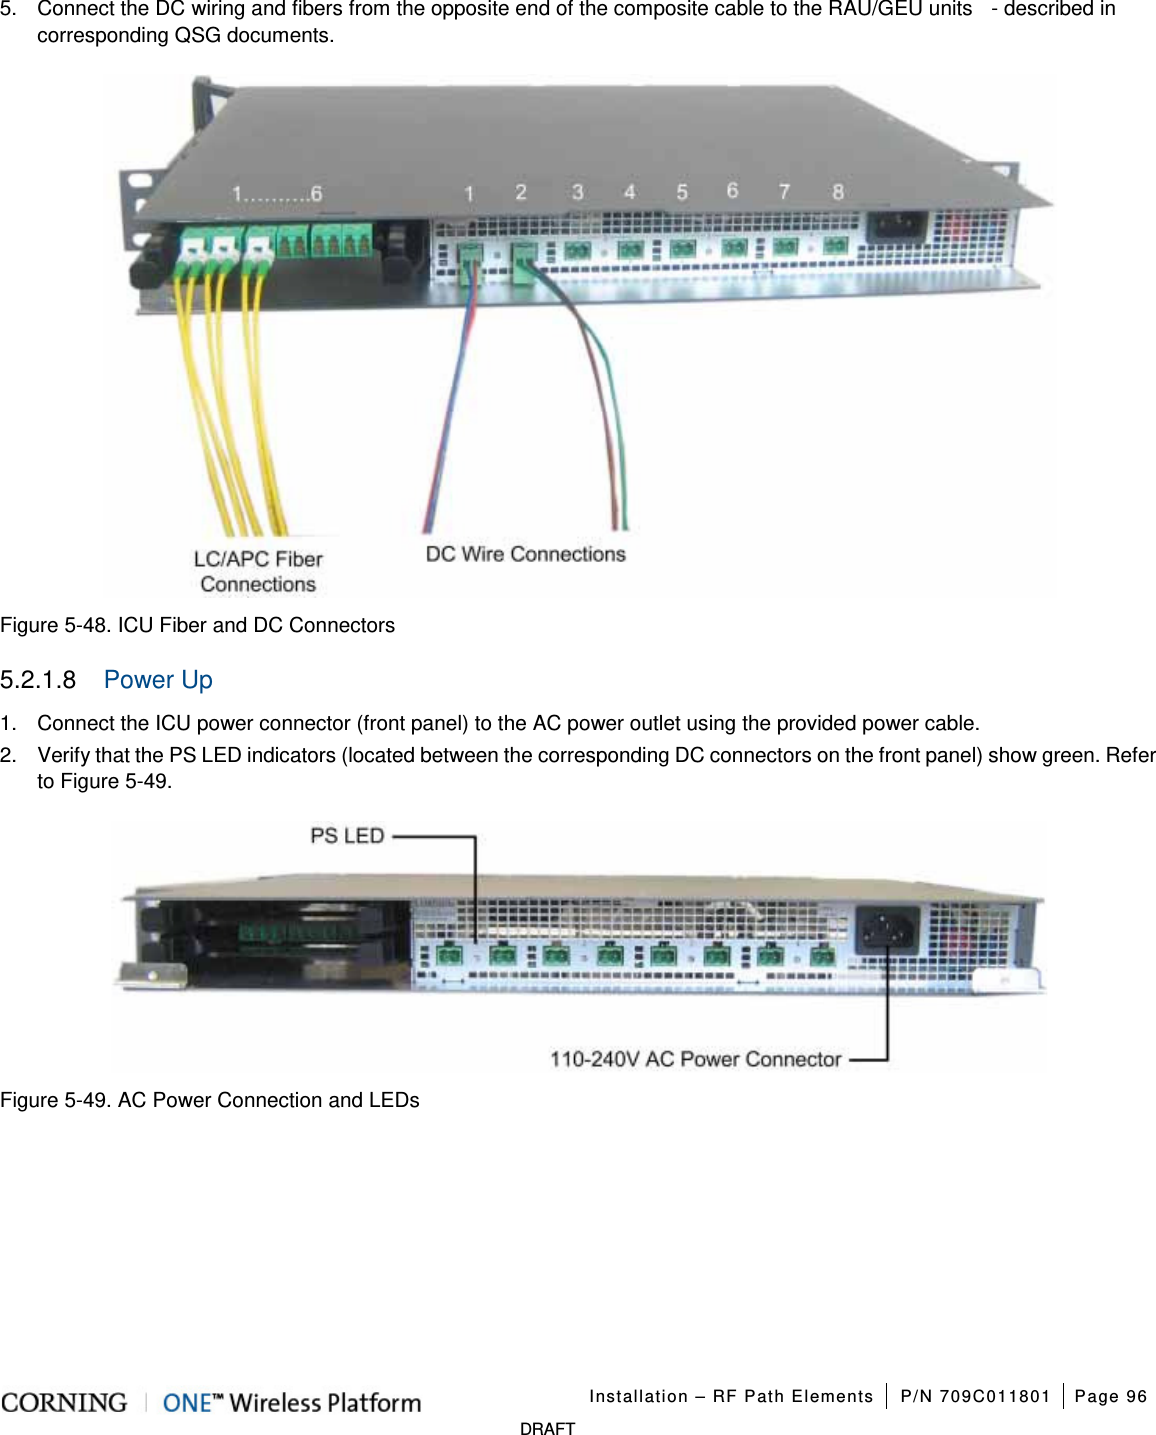   Installation – RF Path Elements P/N 709C011801 Page 96   DRAFT 5.  Connect the DC wiring and fibers from the opposite end of the composite cable to the RAU/GEU units    - described in corresponding QSG documents.      Figure  5-48. ICU Fiber and DC Connectors 5.2.1.8  Power Up 1.  Connect the ICU power connector (front panel) to the AC power outlet using the provided power cable. 2.  Verify that the PS LED indicators (located between the corresponding DC connectors on the front panel) show green. Refer to Figure  5-49.    Figure  5-49. AC Power Connection and LEDs    